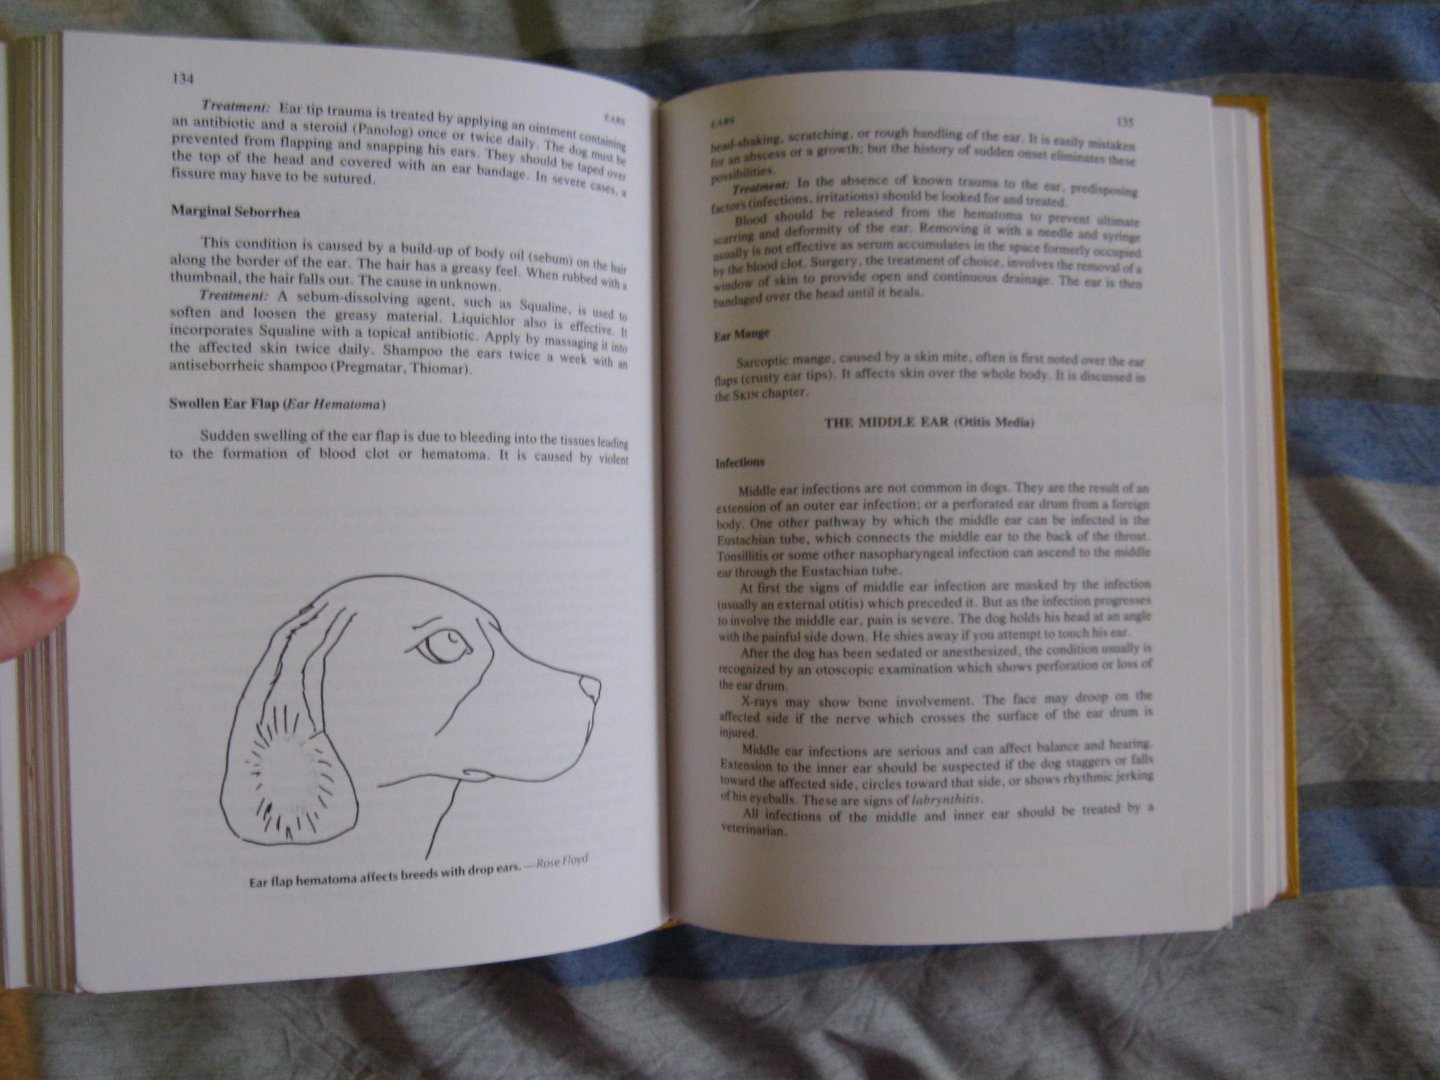 delbert g. carlson, d.v.m. and james m. giffin m.d. - dog owner's home veterinary handbook